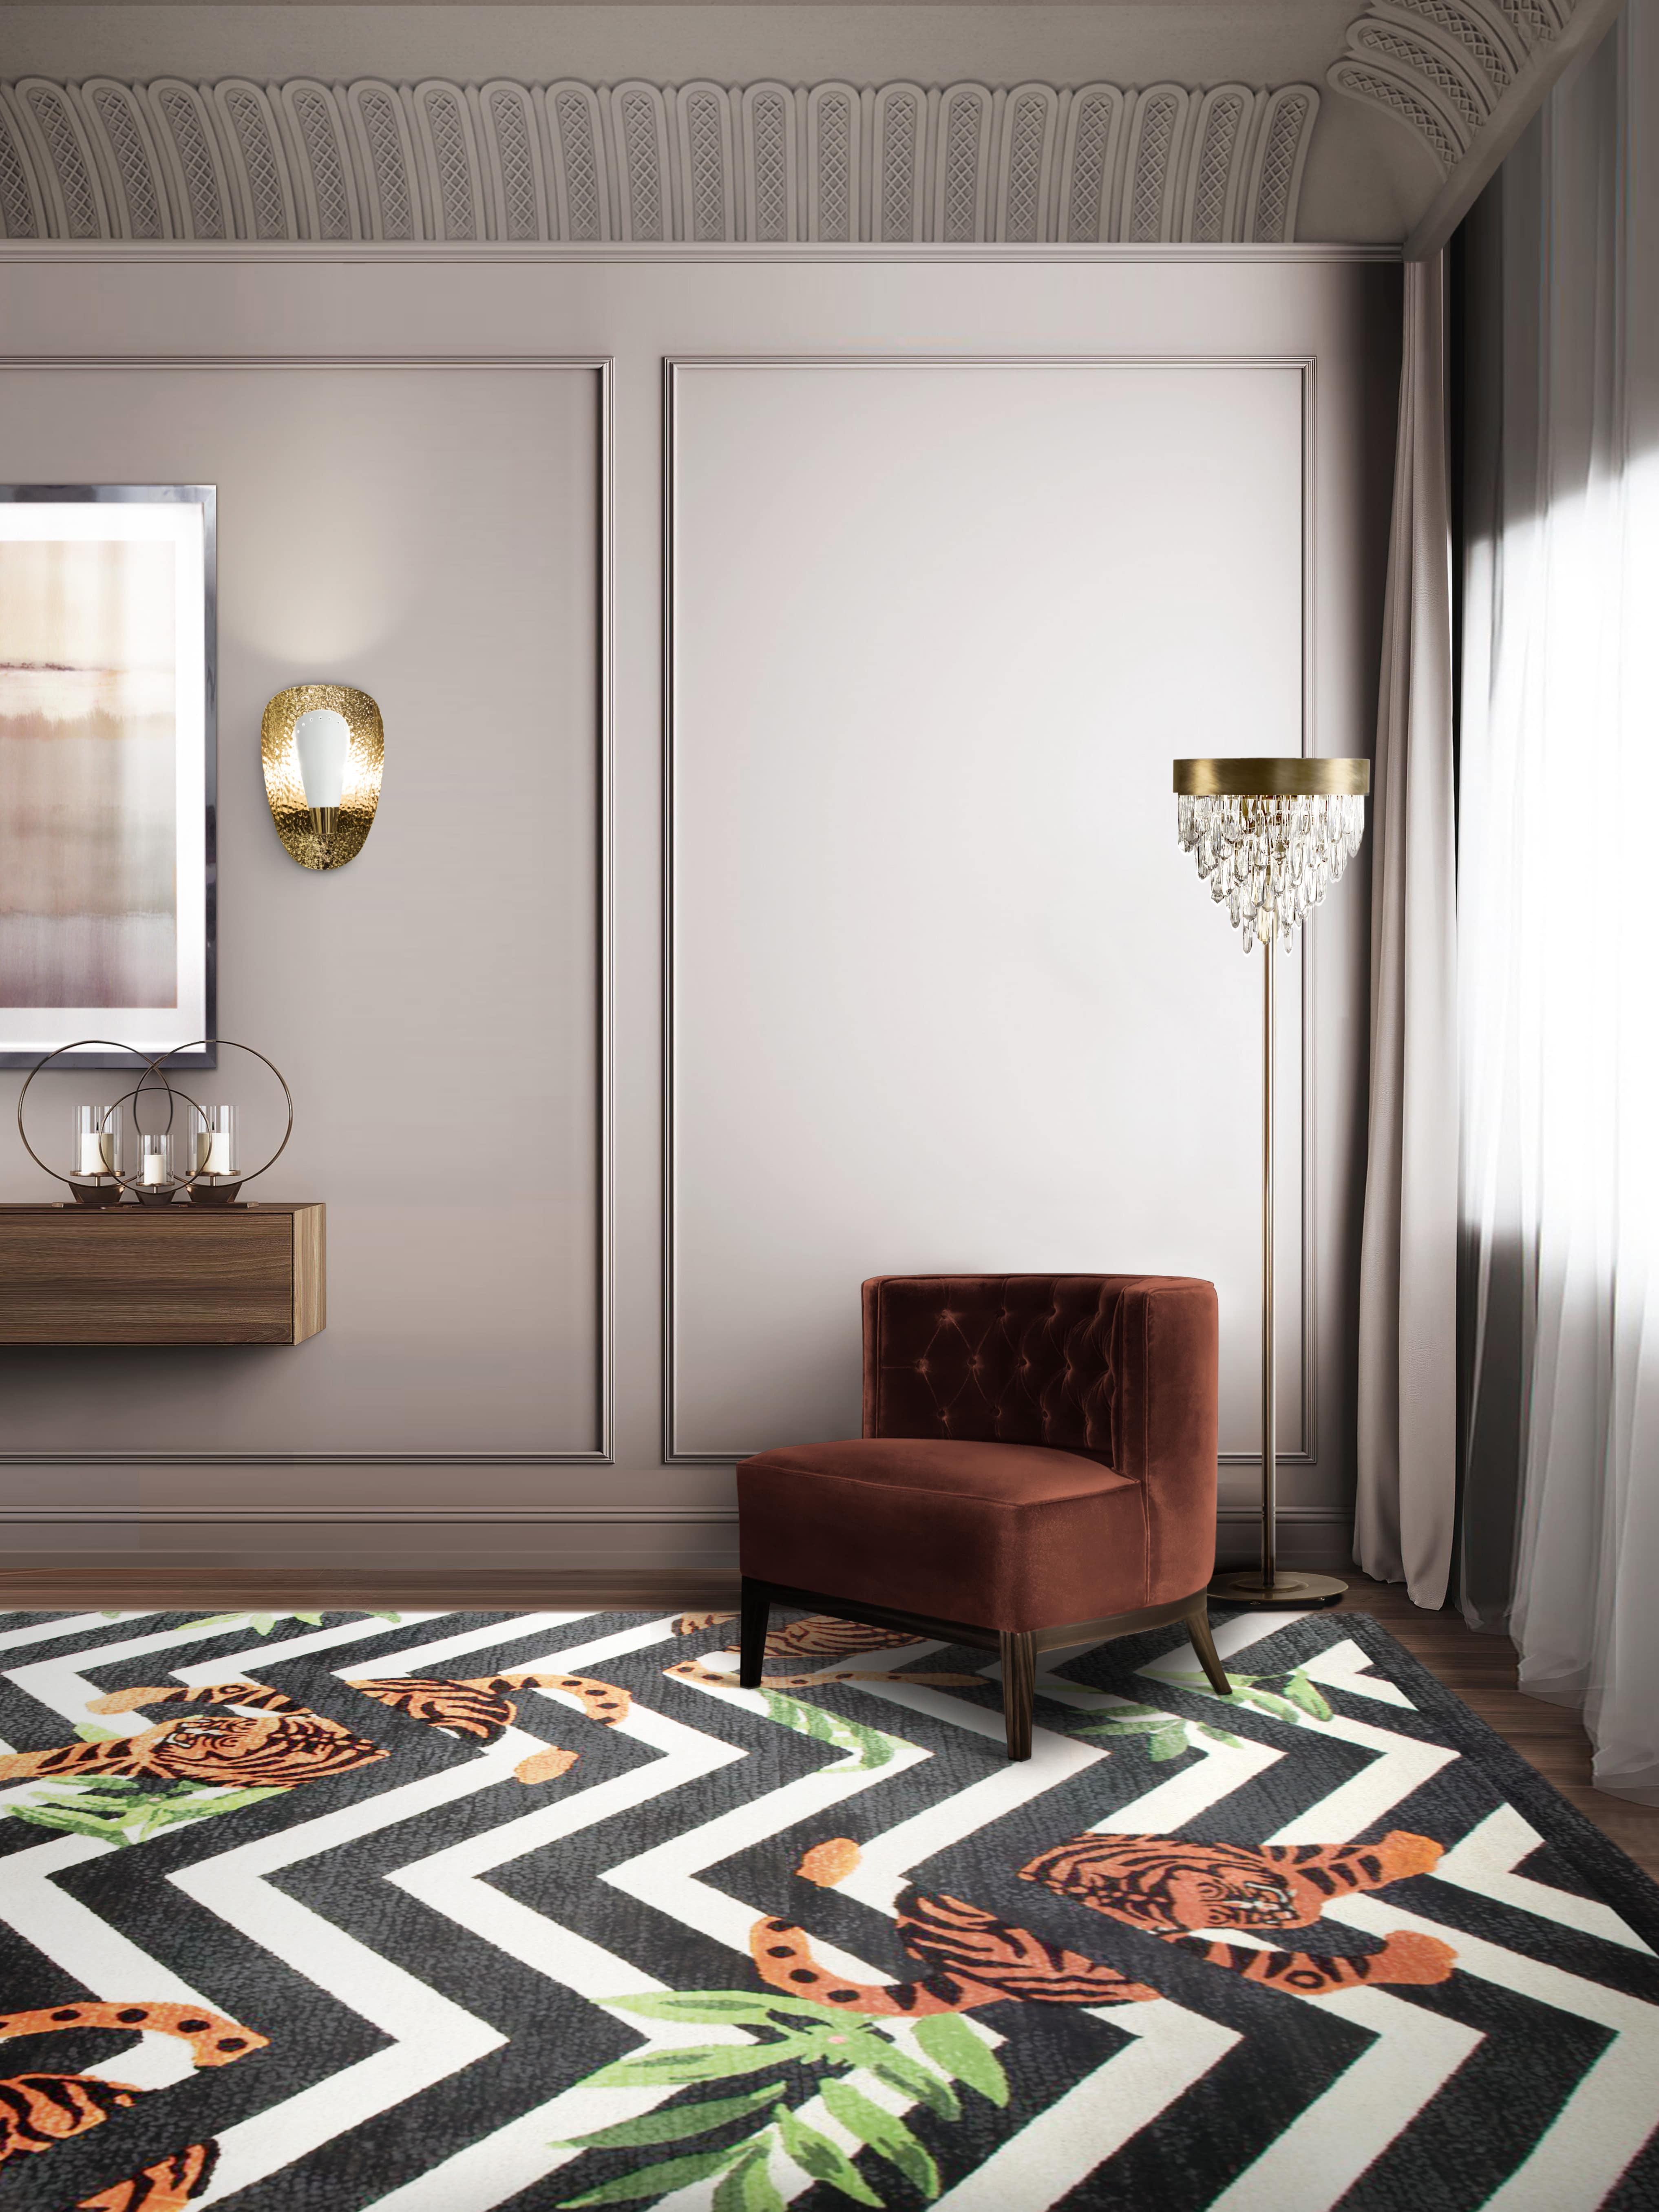 The Perfect Modern Design That Can Only Be Brought Out By The Perfect Bedroom Rug - Home'Society